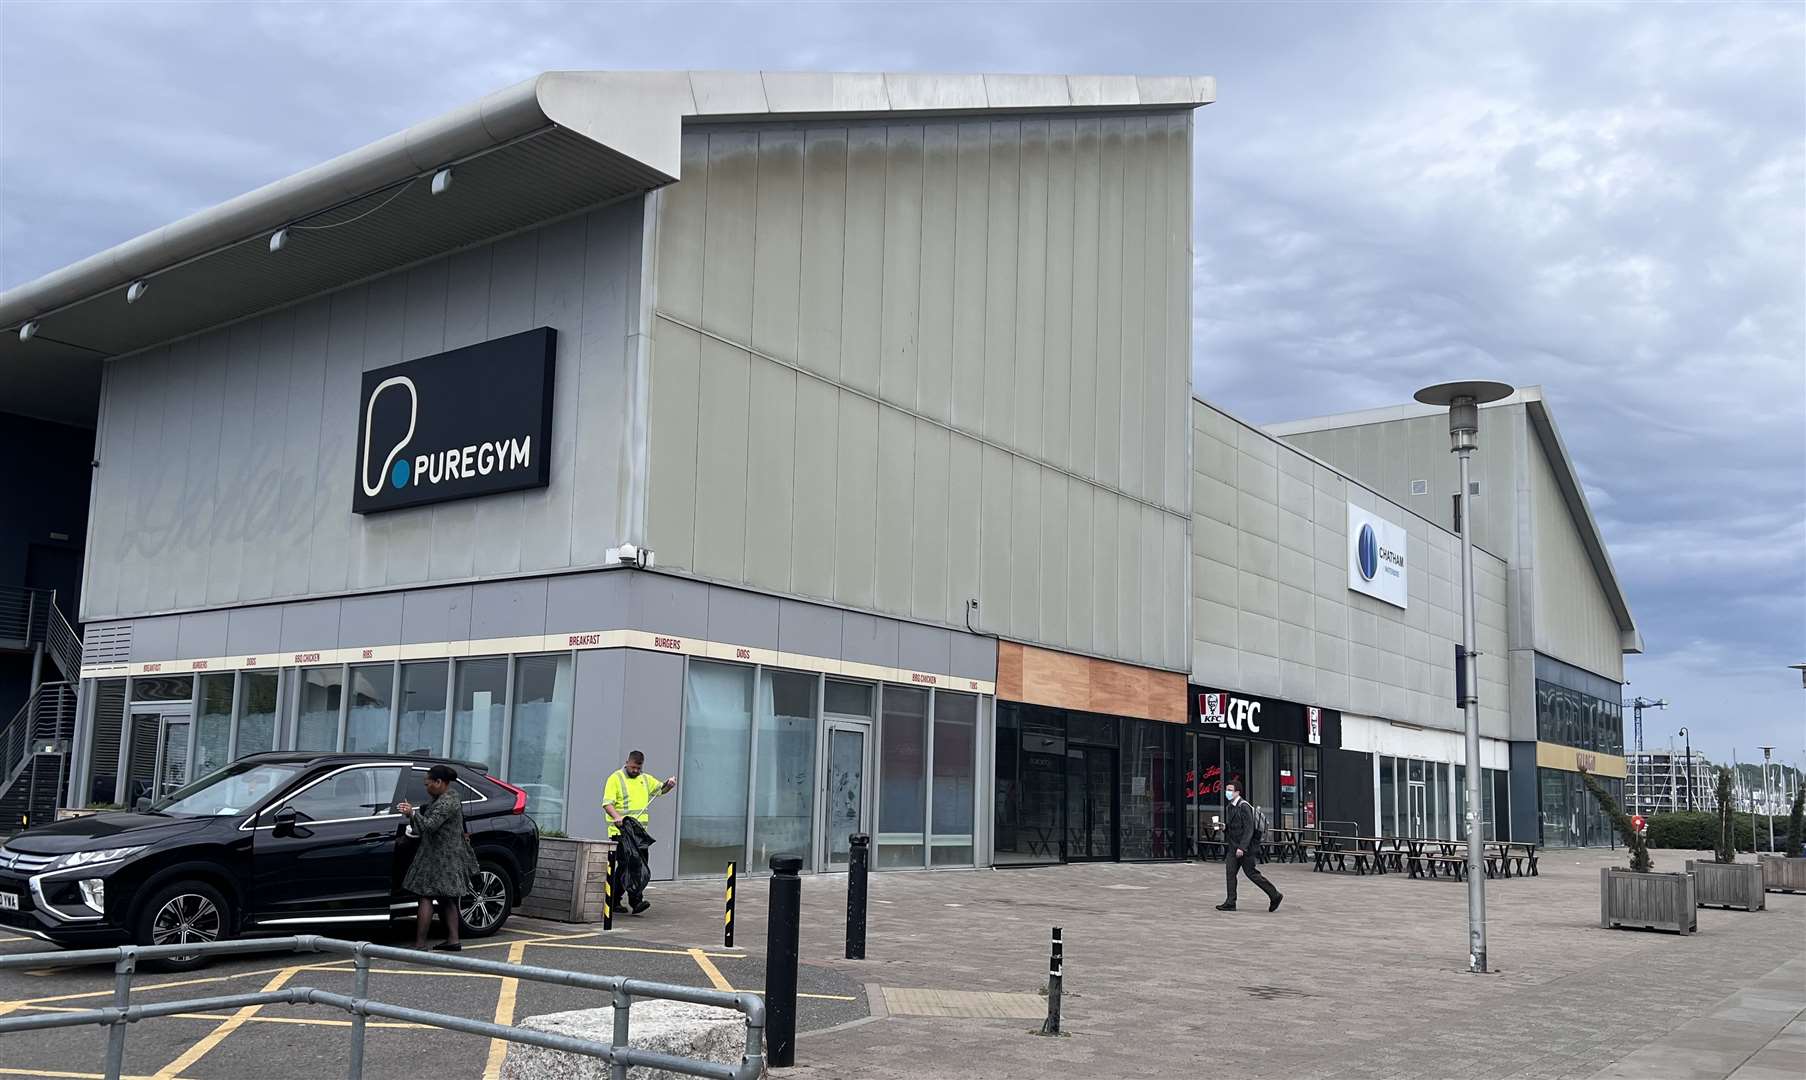 The new shops will take over the former Friendly Phil's restaurant, at Chatham Waterside